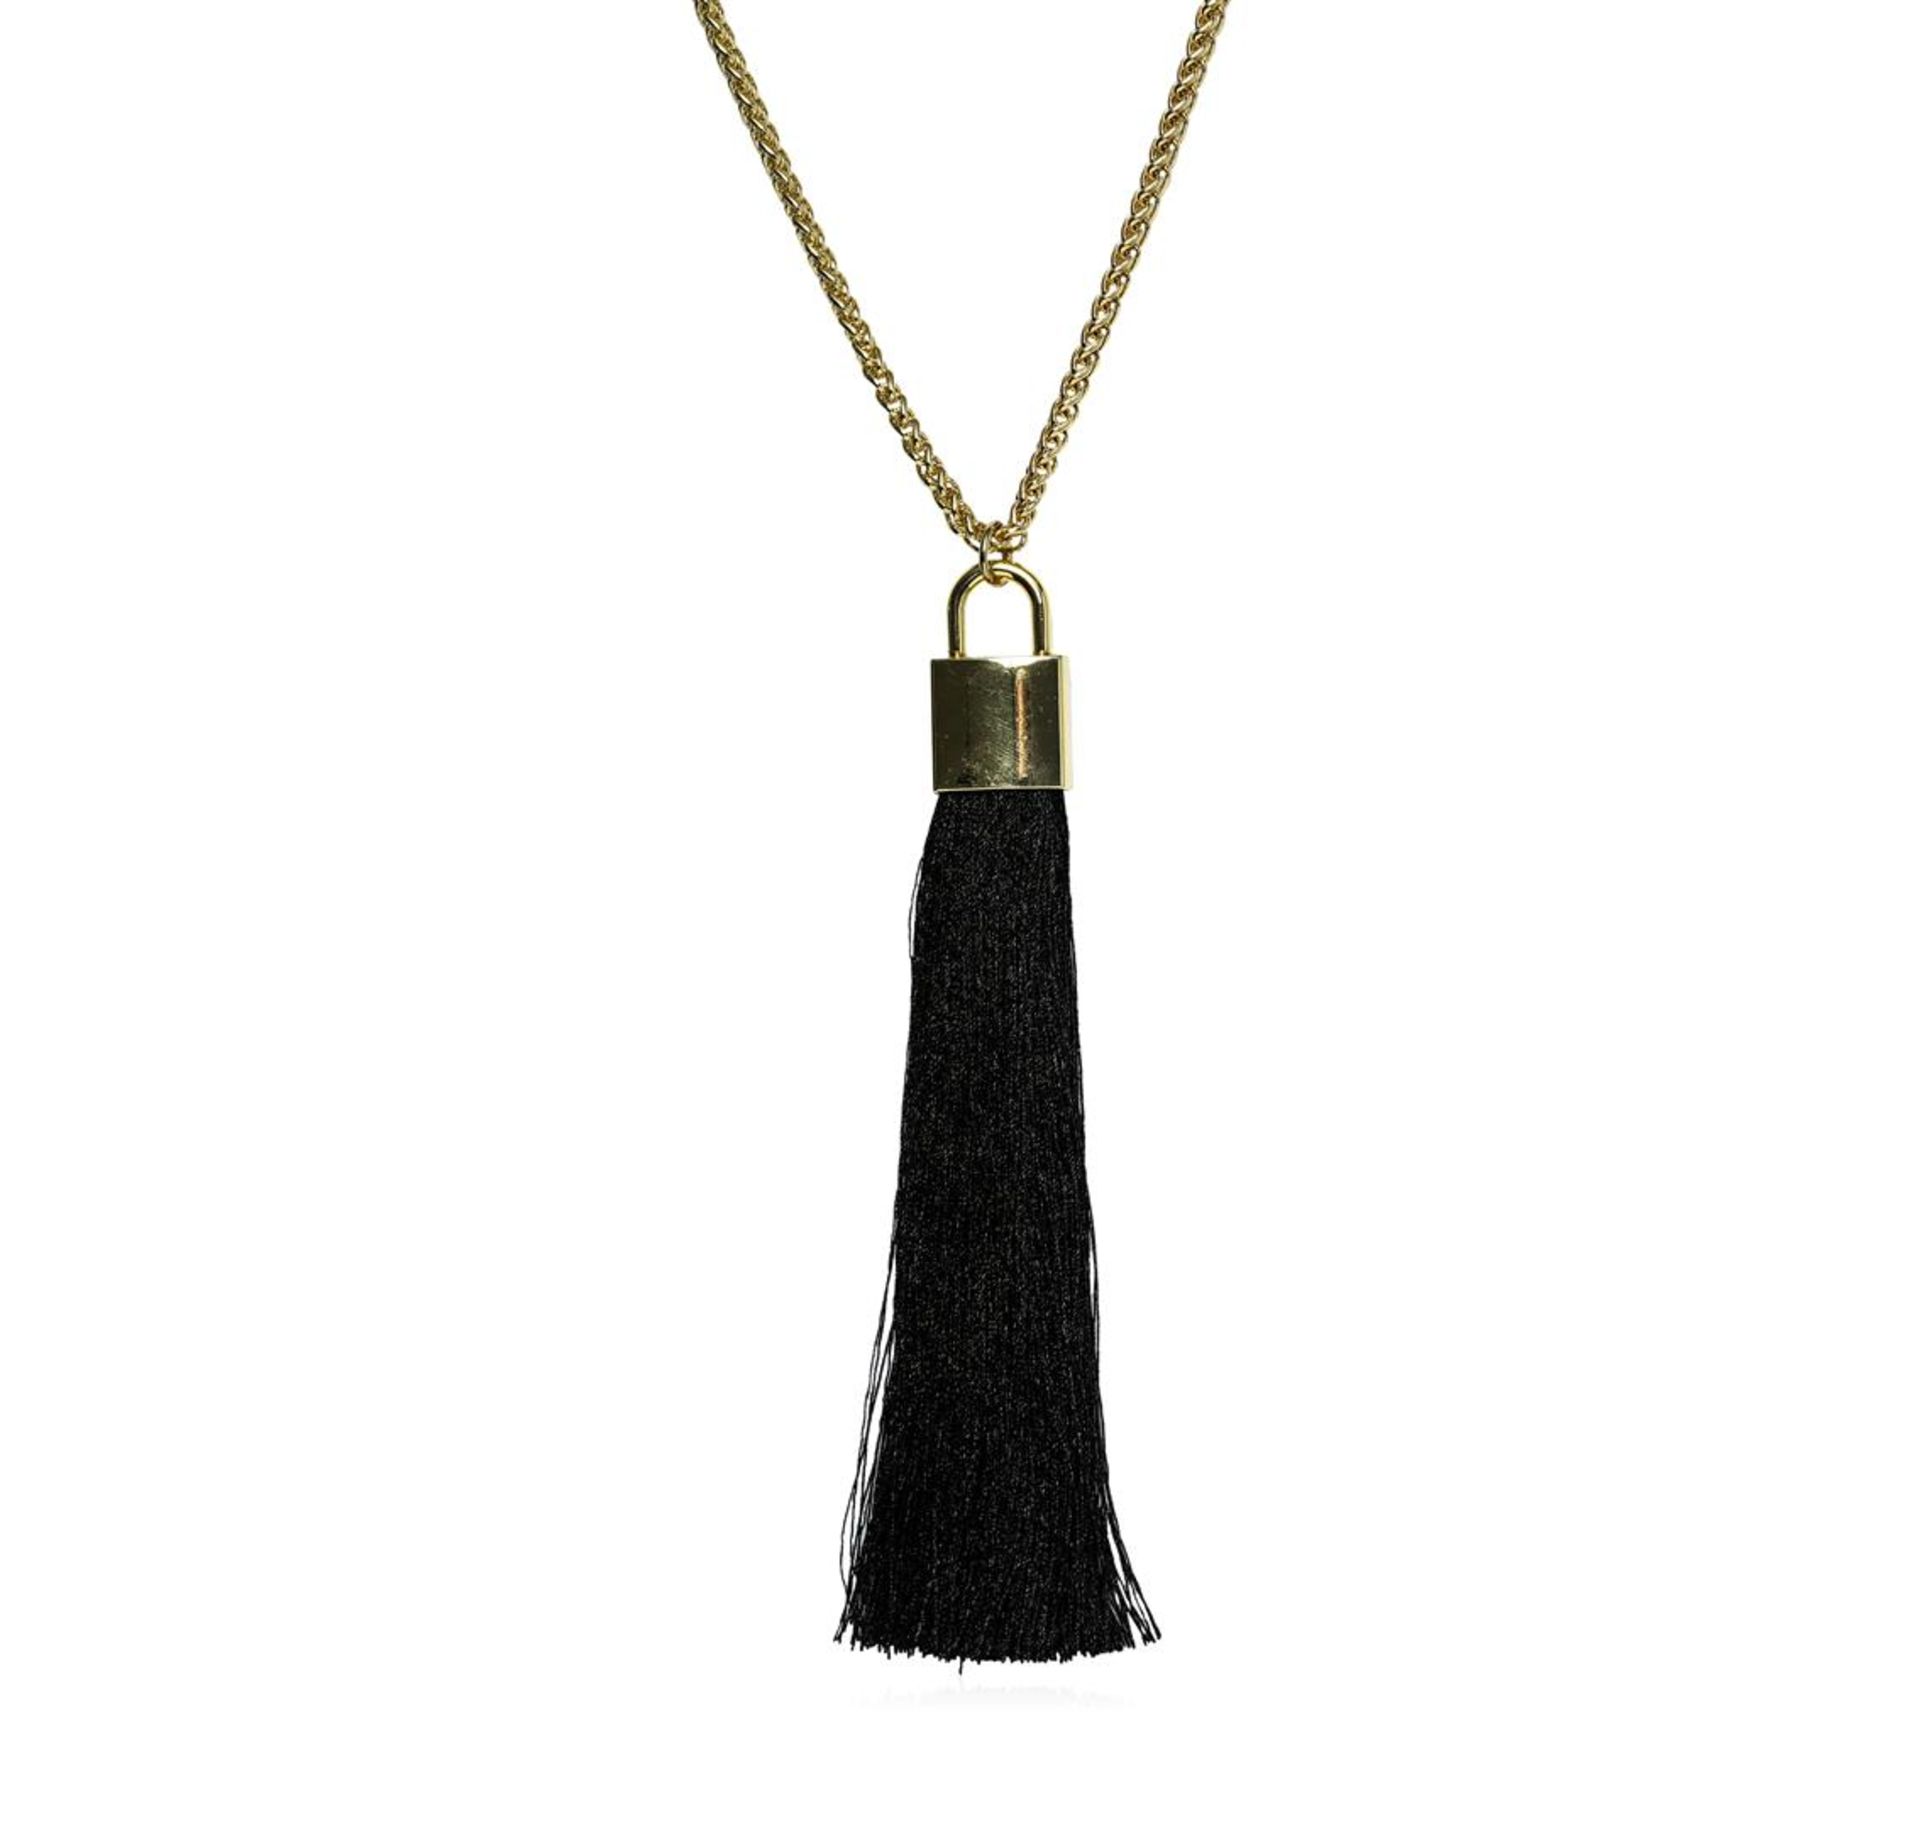 Silk Tassel Square Pendant Necklace - Gold Plated - Image 2 of 2